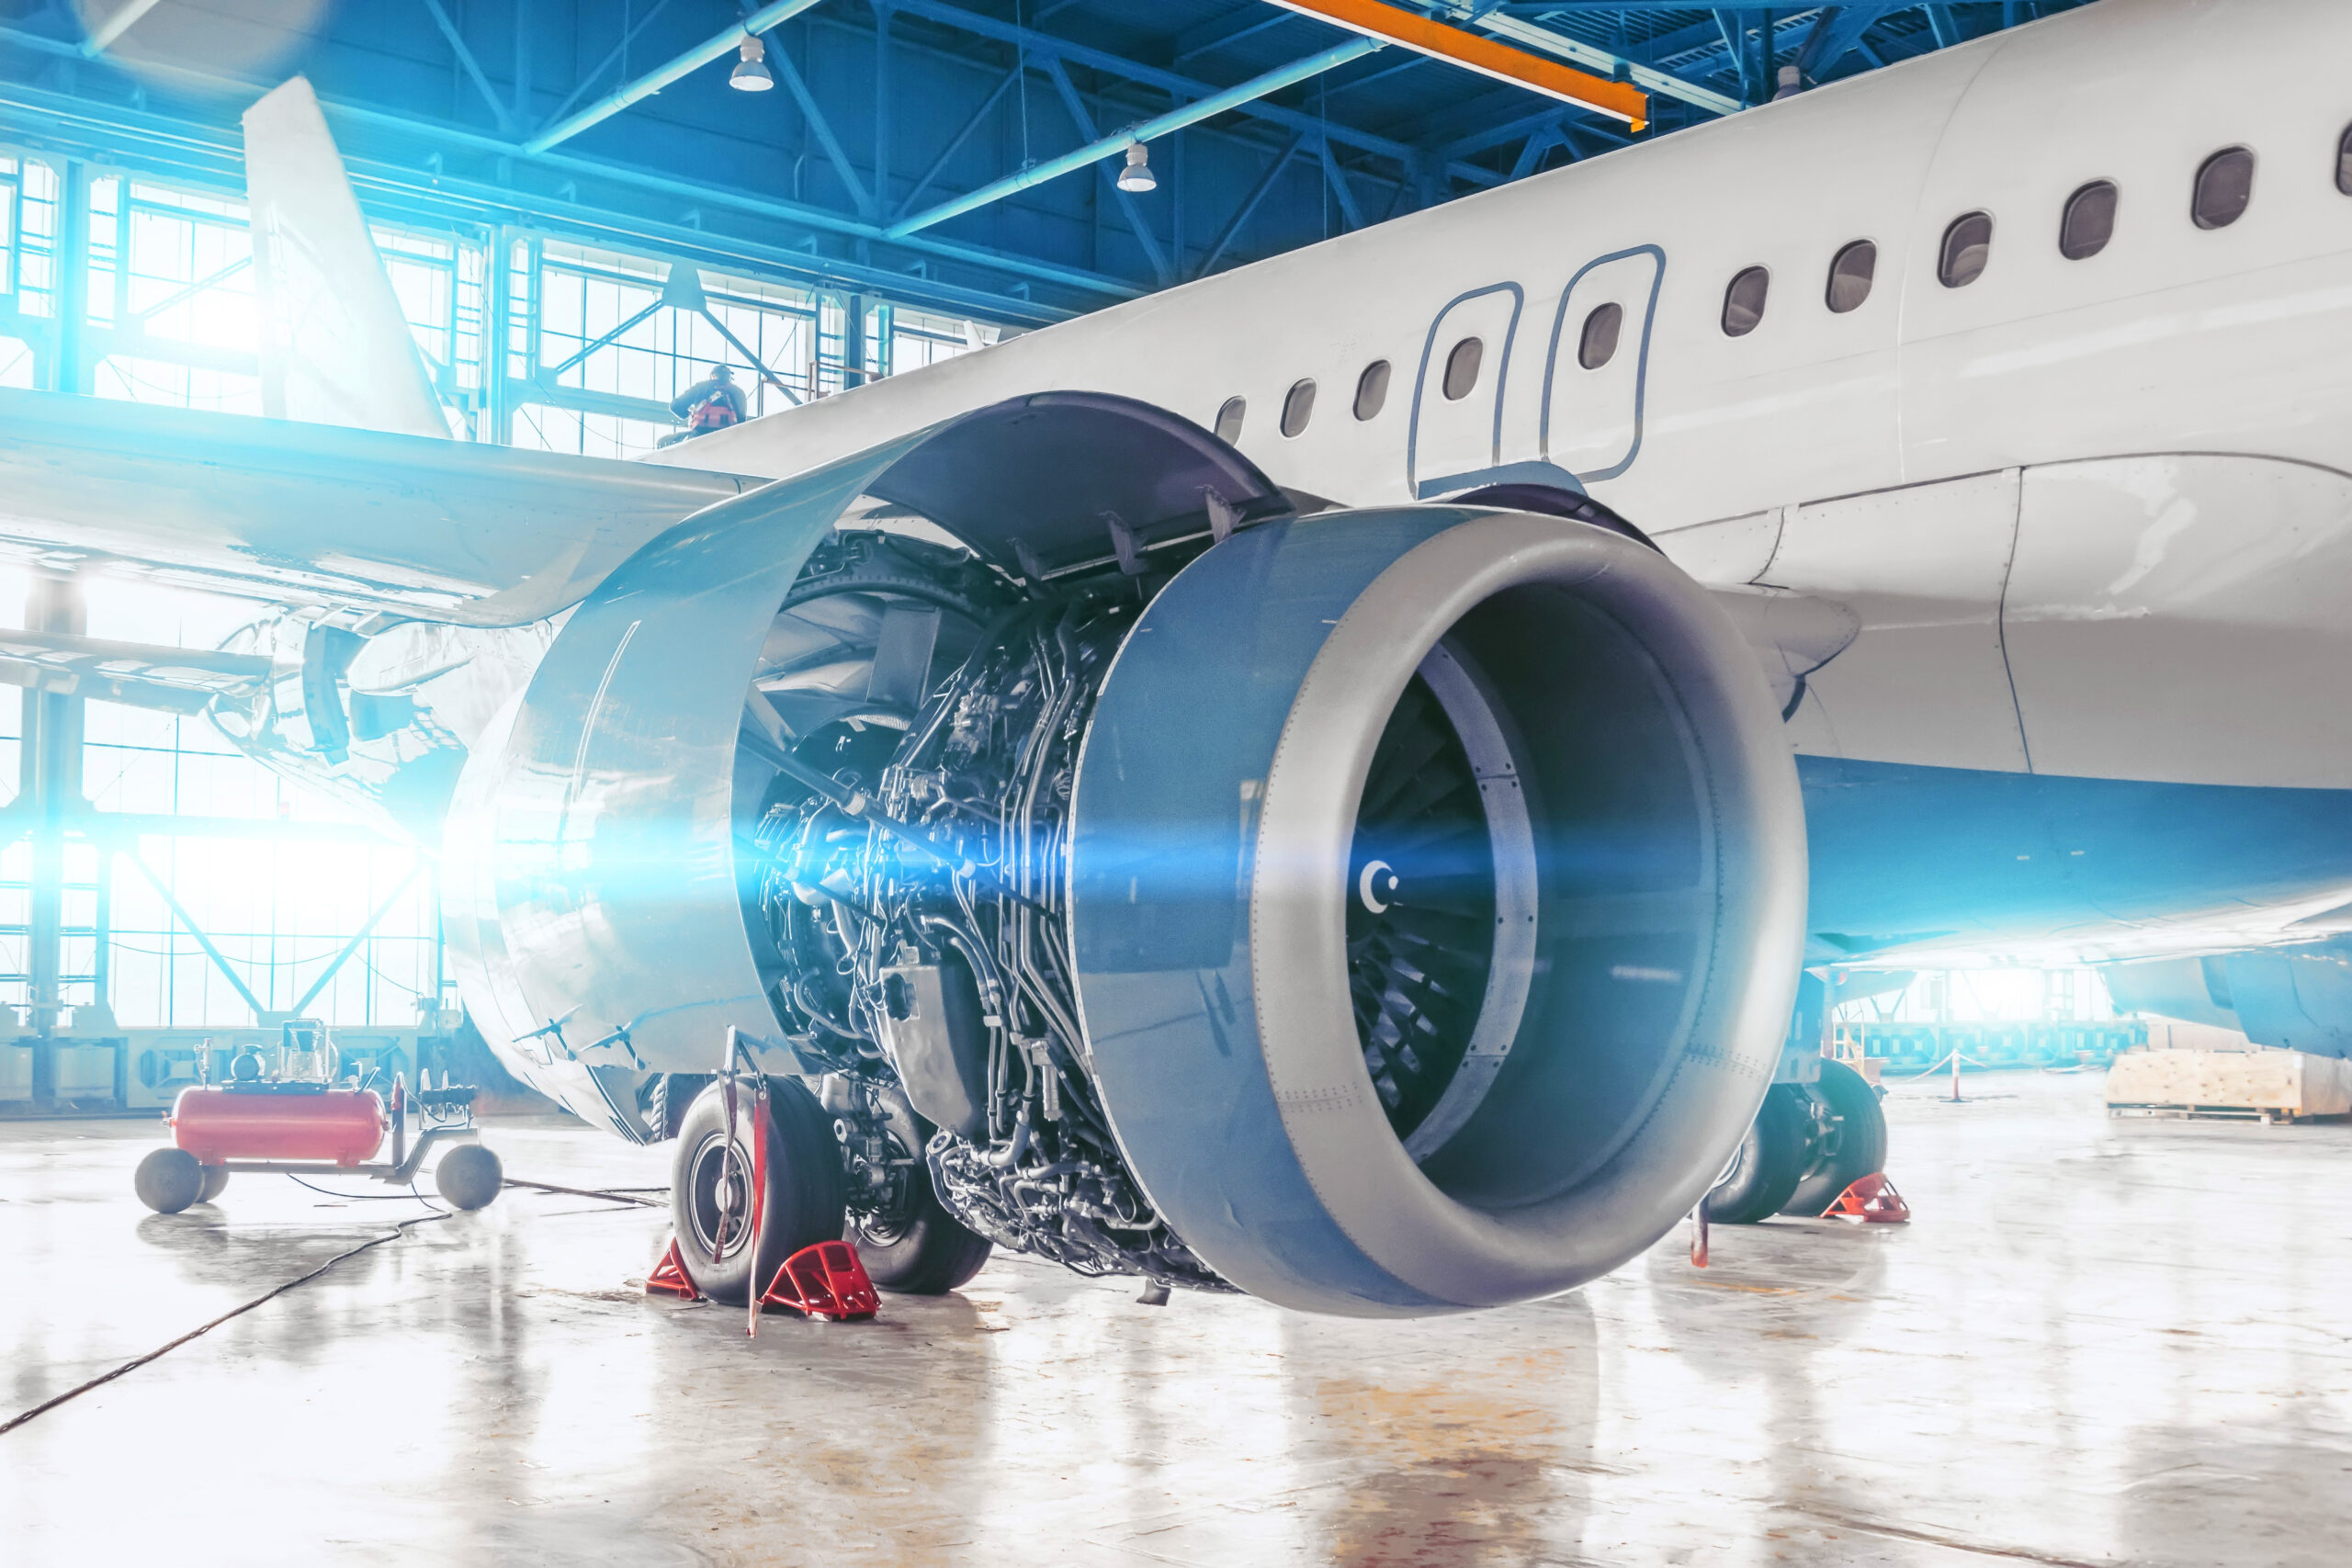 Aircraft maintenance can greatly contribute from using PMA parts